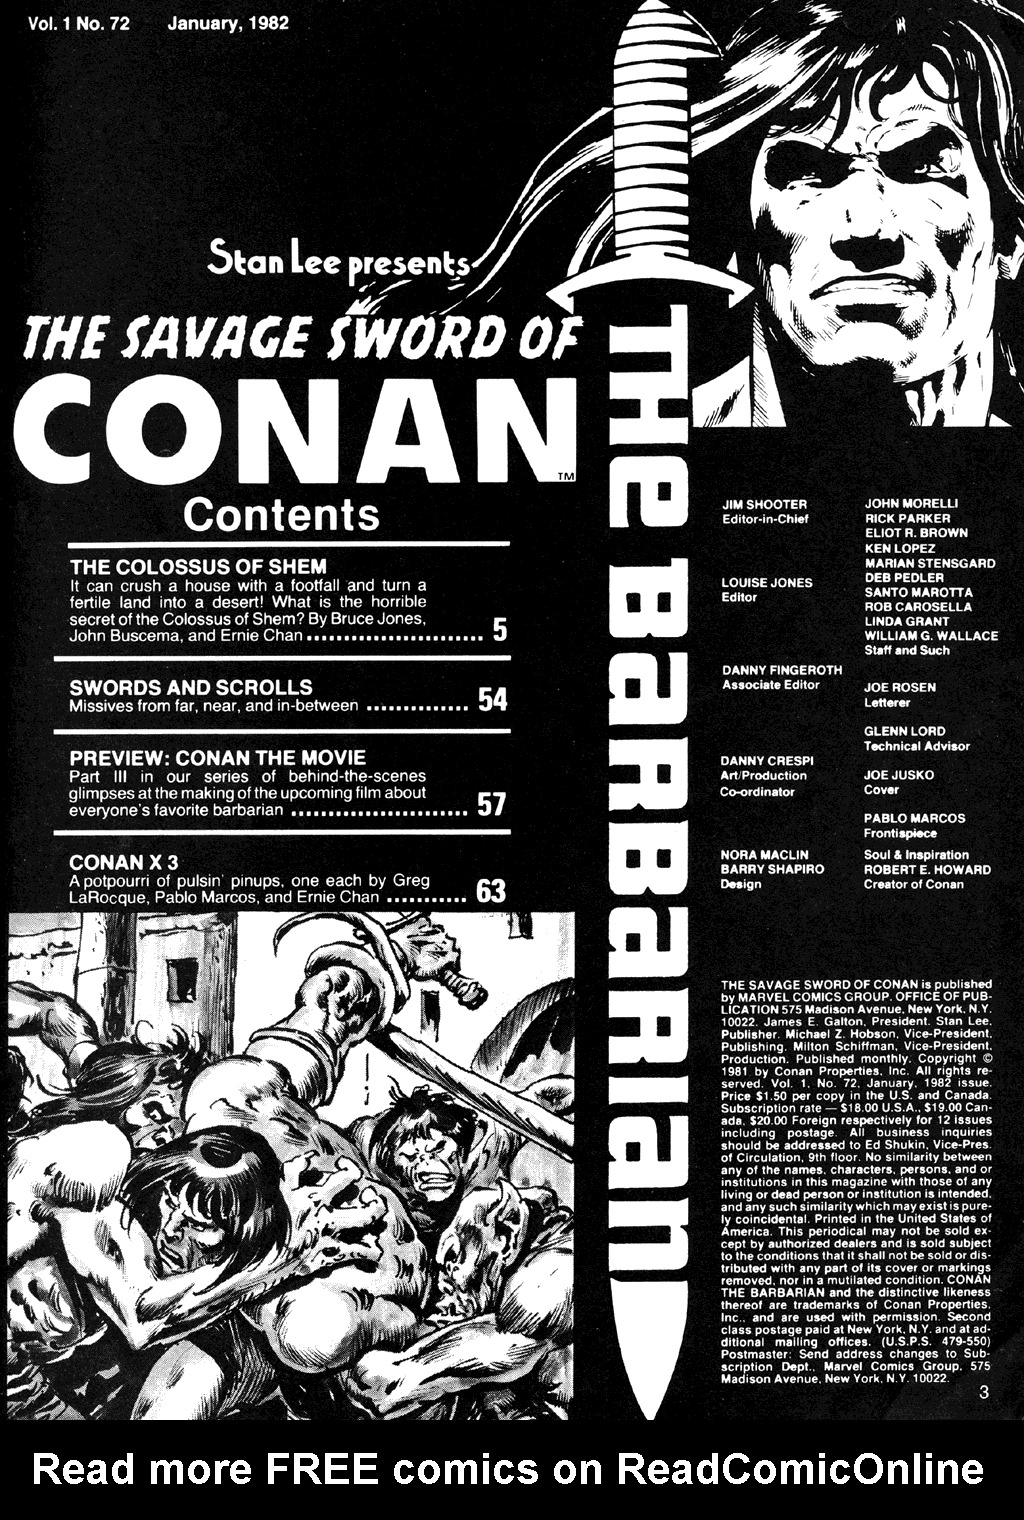 Read online The Savage Sword Of Conan comic -  Issue #72 - 3